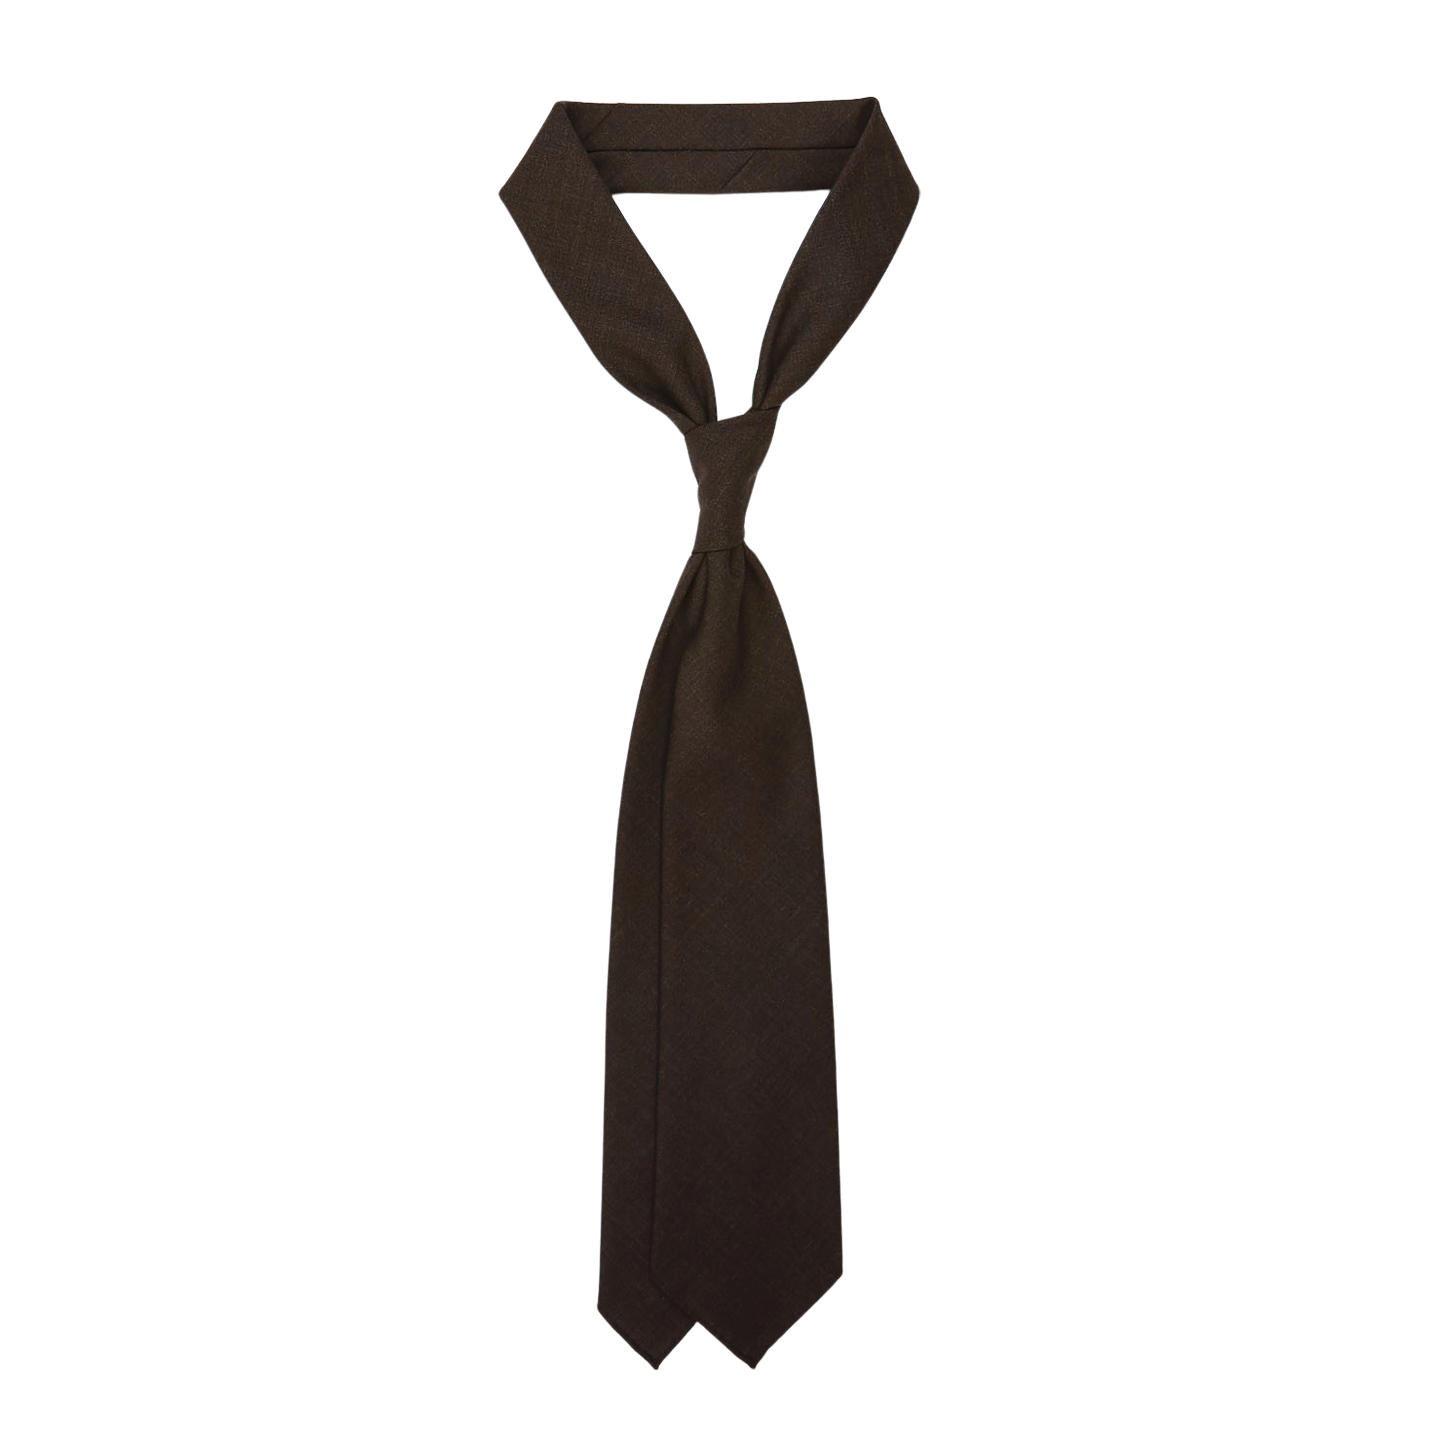 Dreaming of Monday Brown 7-Fold High Twist Wool Tie Feature